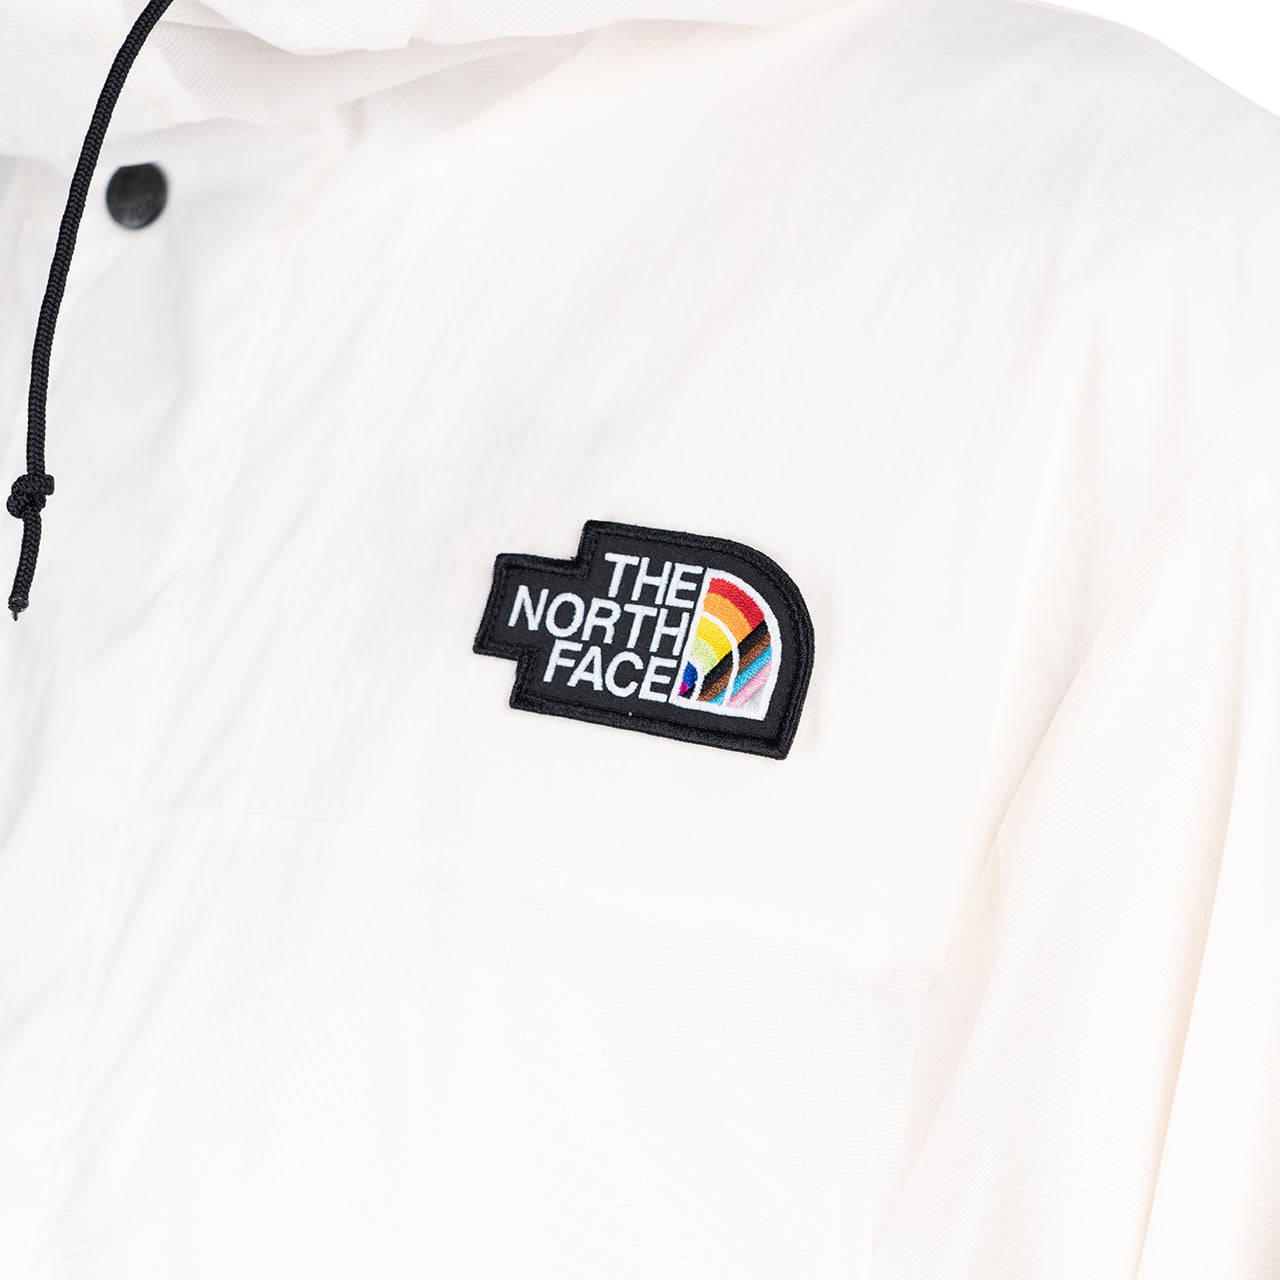 The North Face Outline Jacket (Weiß)  - Allike Store